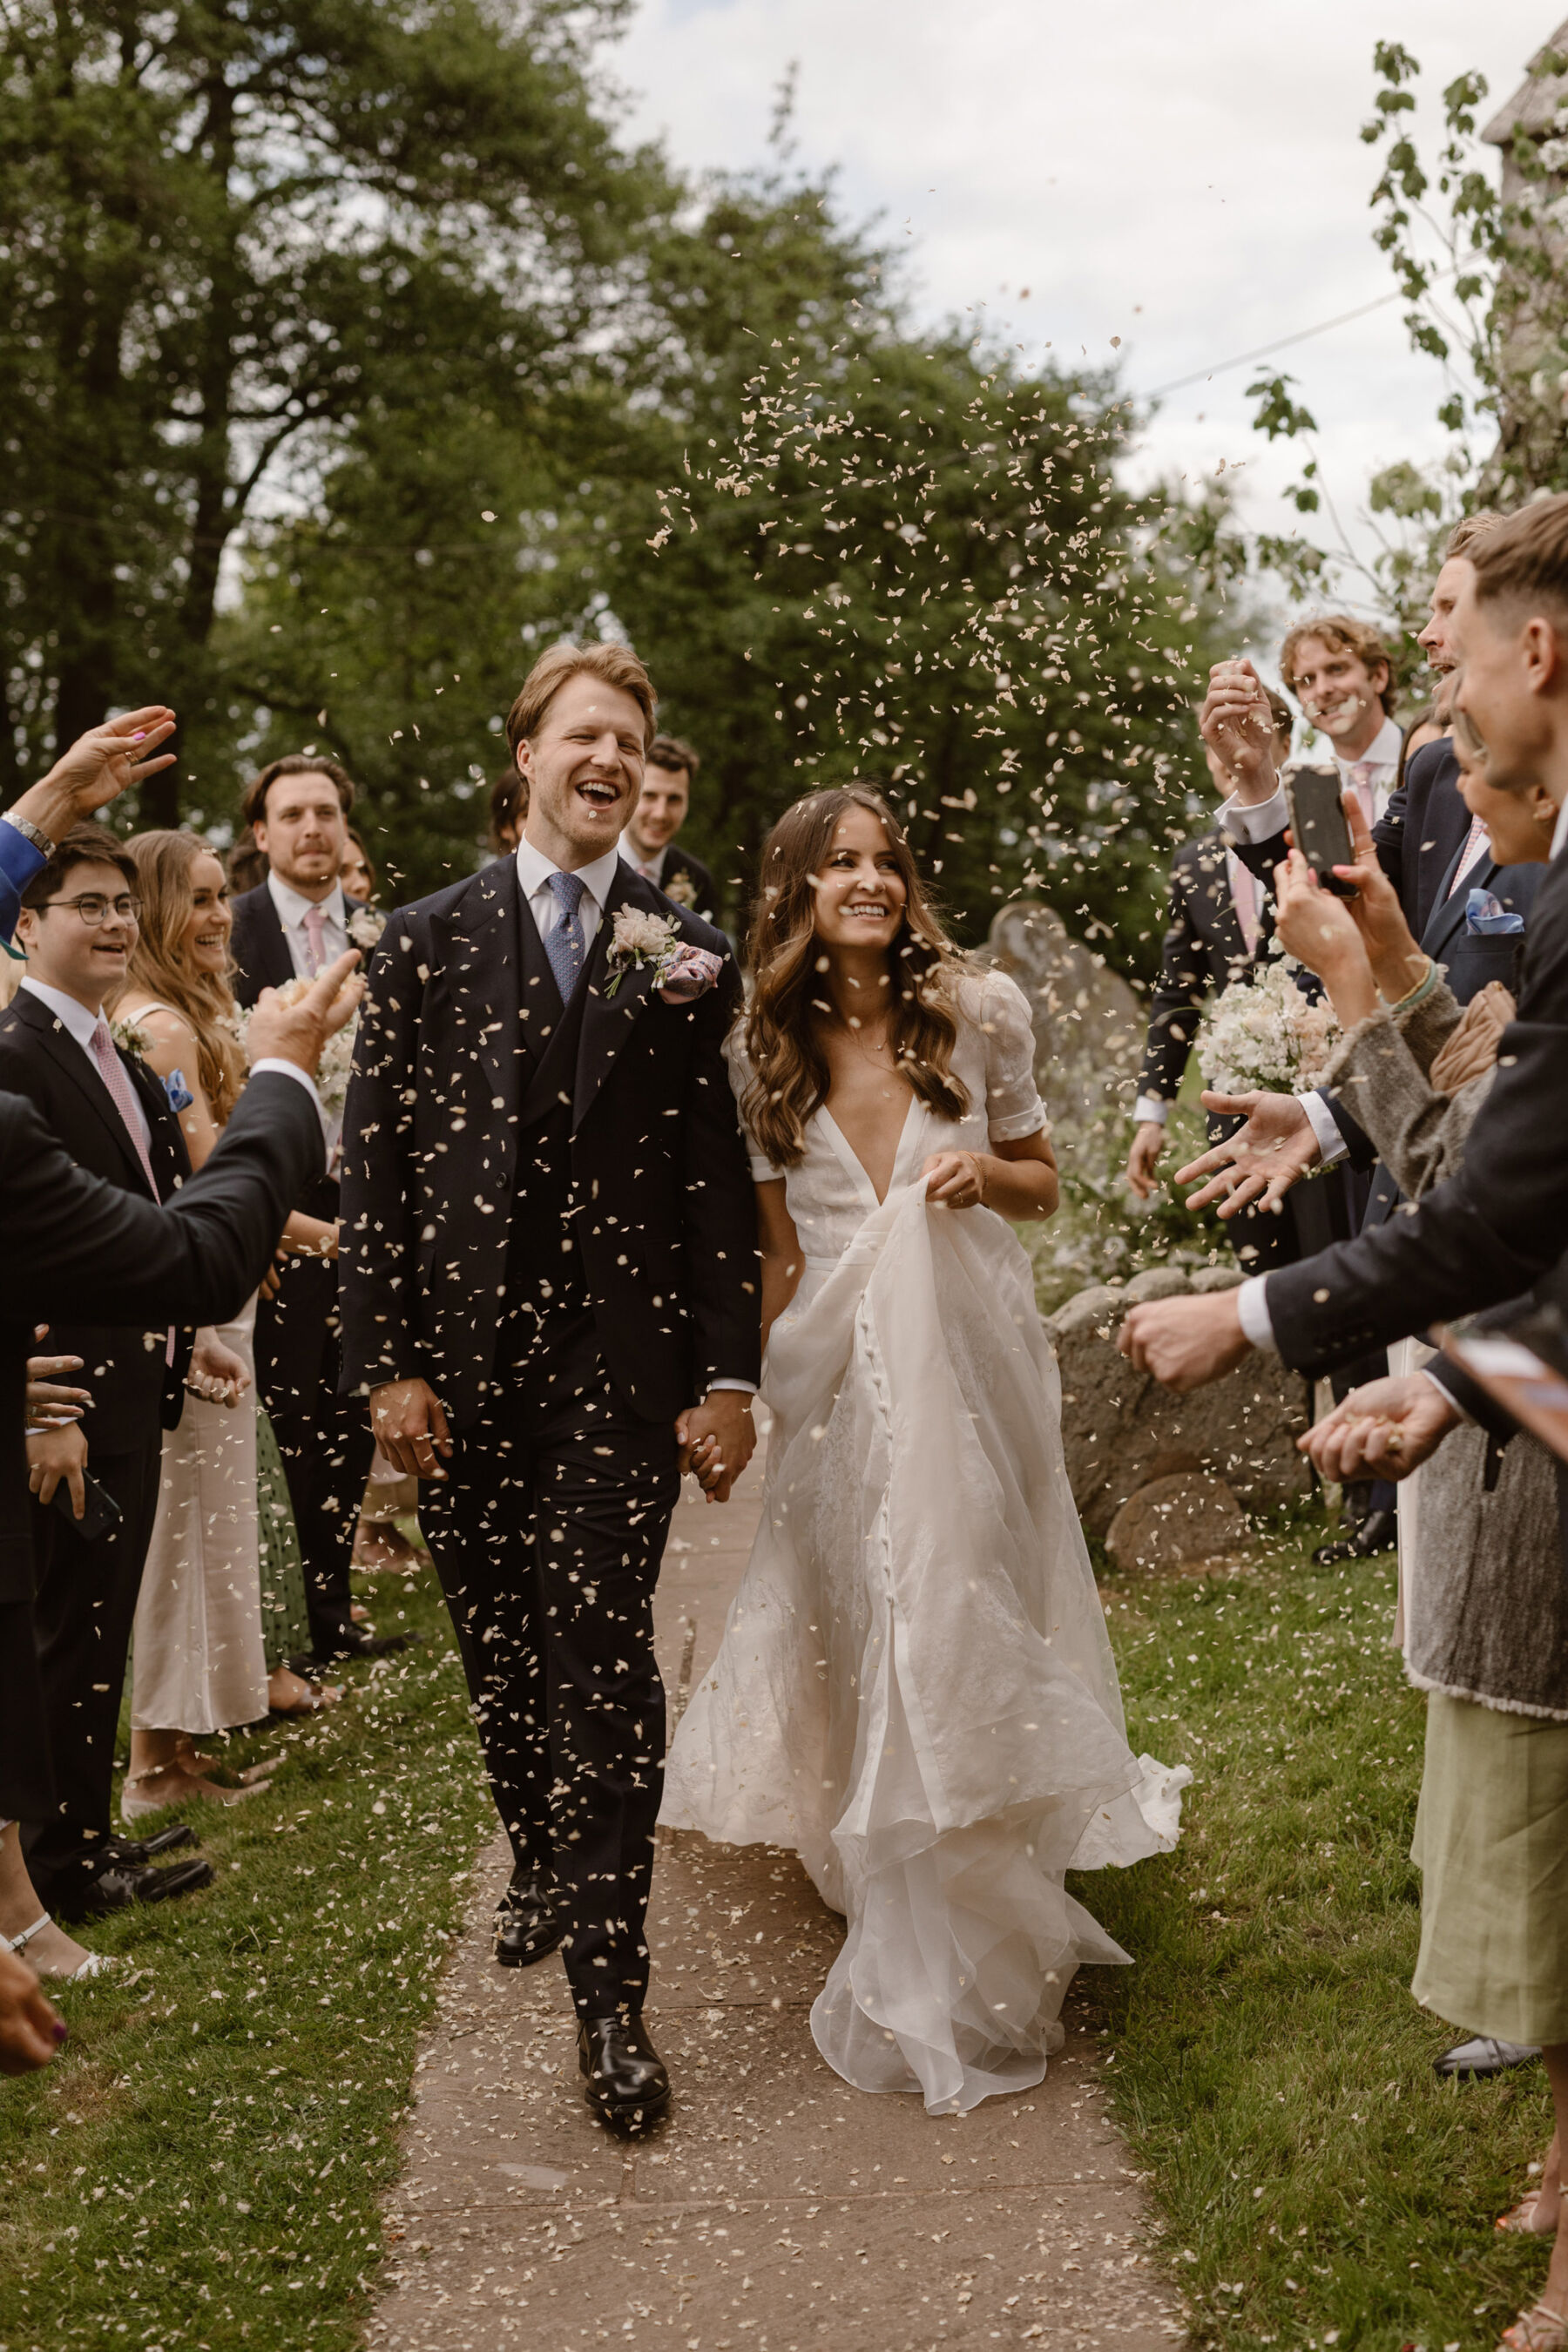 Confetti shower. Bride wears J Andreatta gown. Dewsall Court wedding. Agnes Black Photograpy.